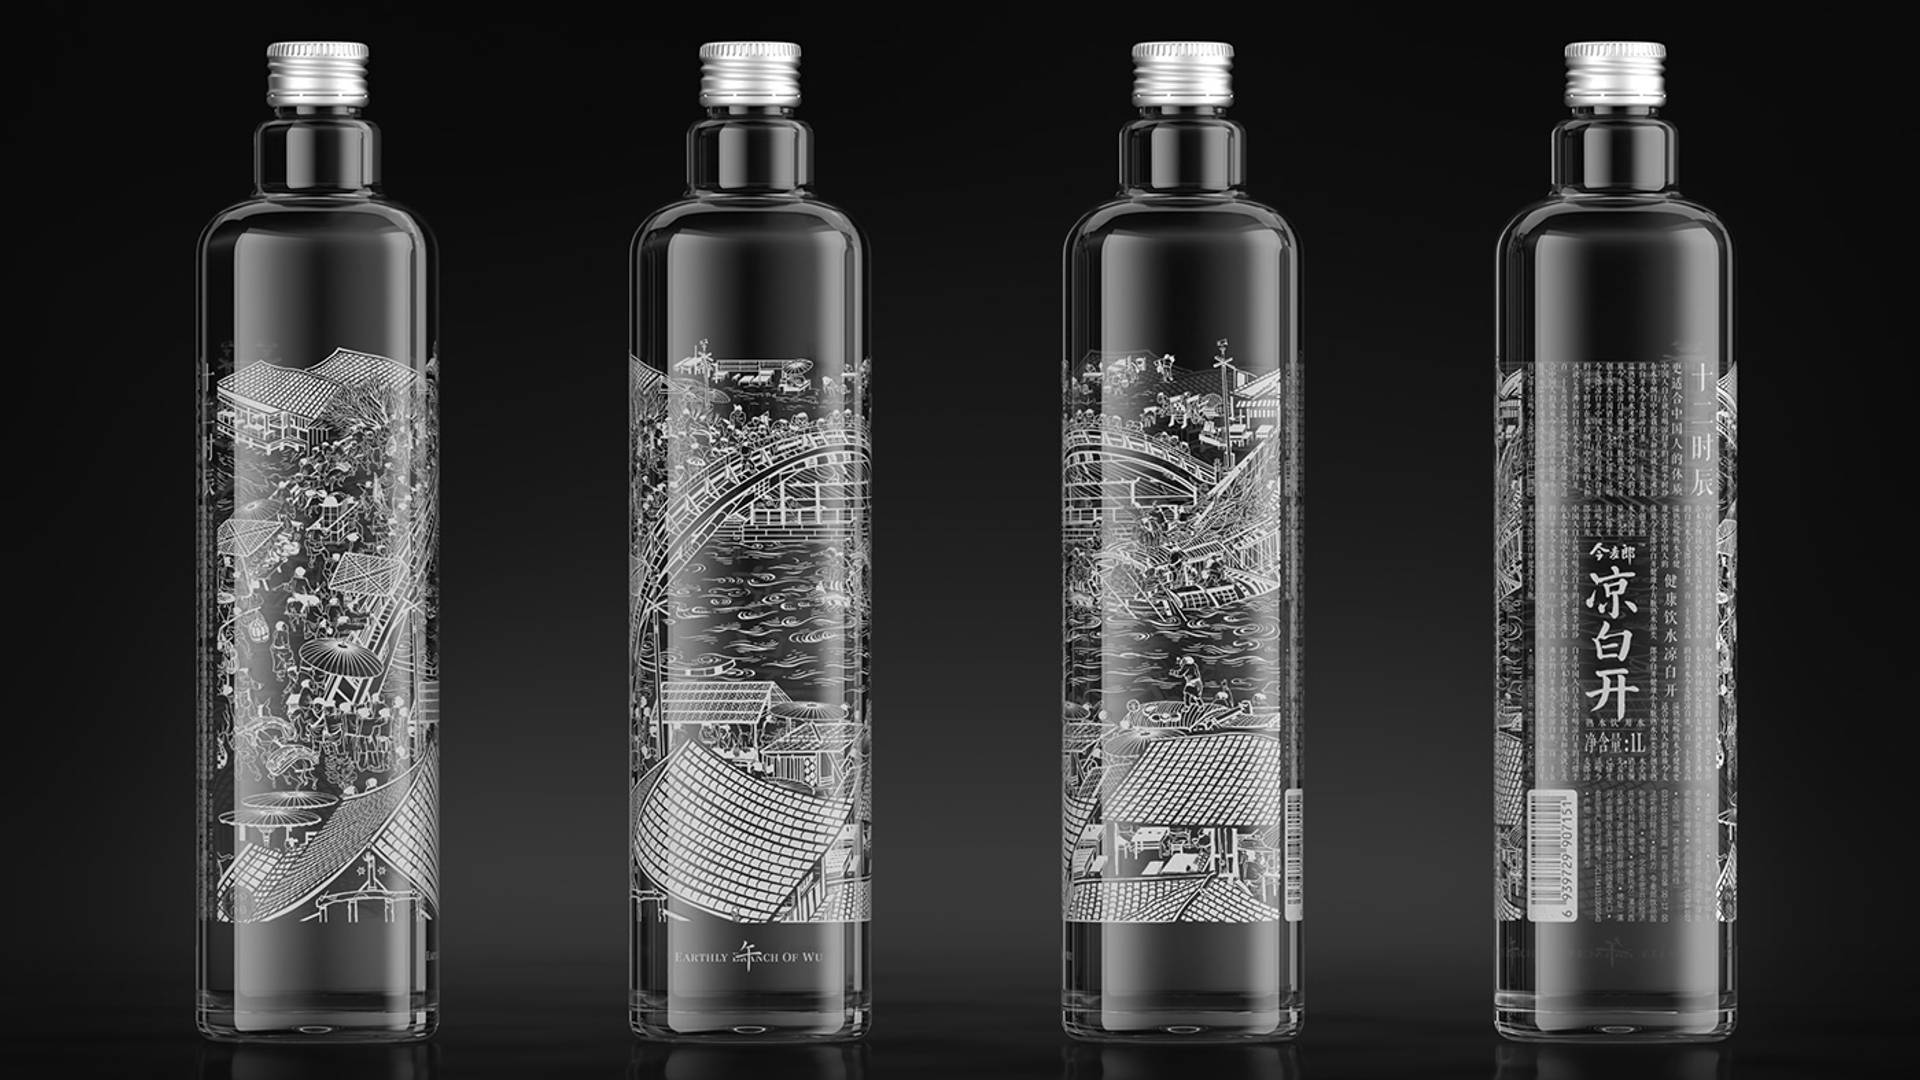 Featured image for Jinmailang Liangbai Kai Collector's Edition Water Bottles Tell An Intricate Story